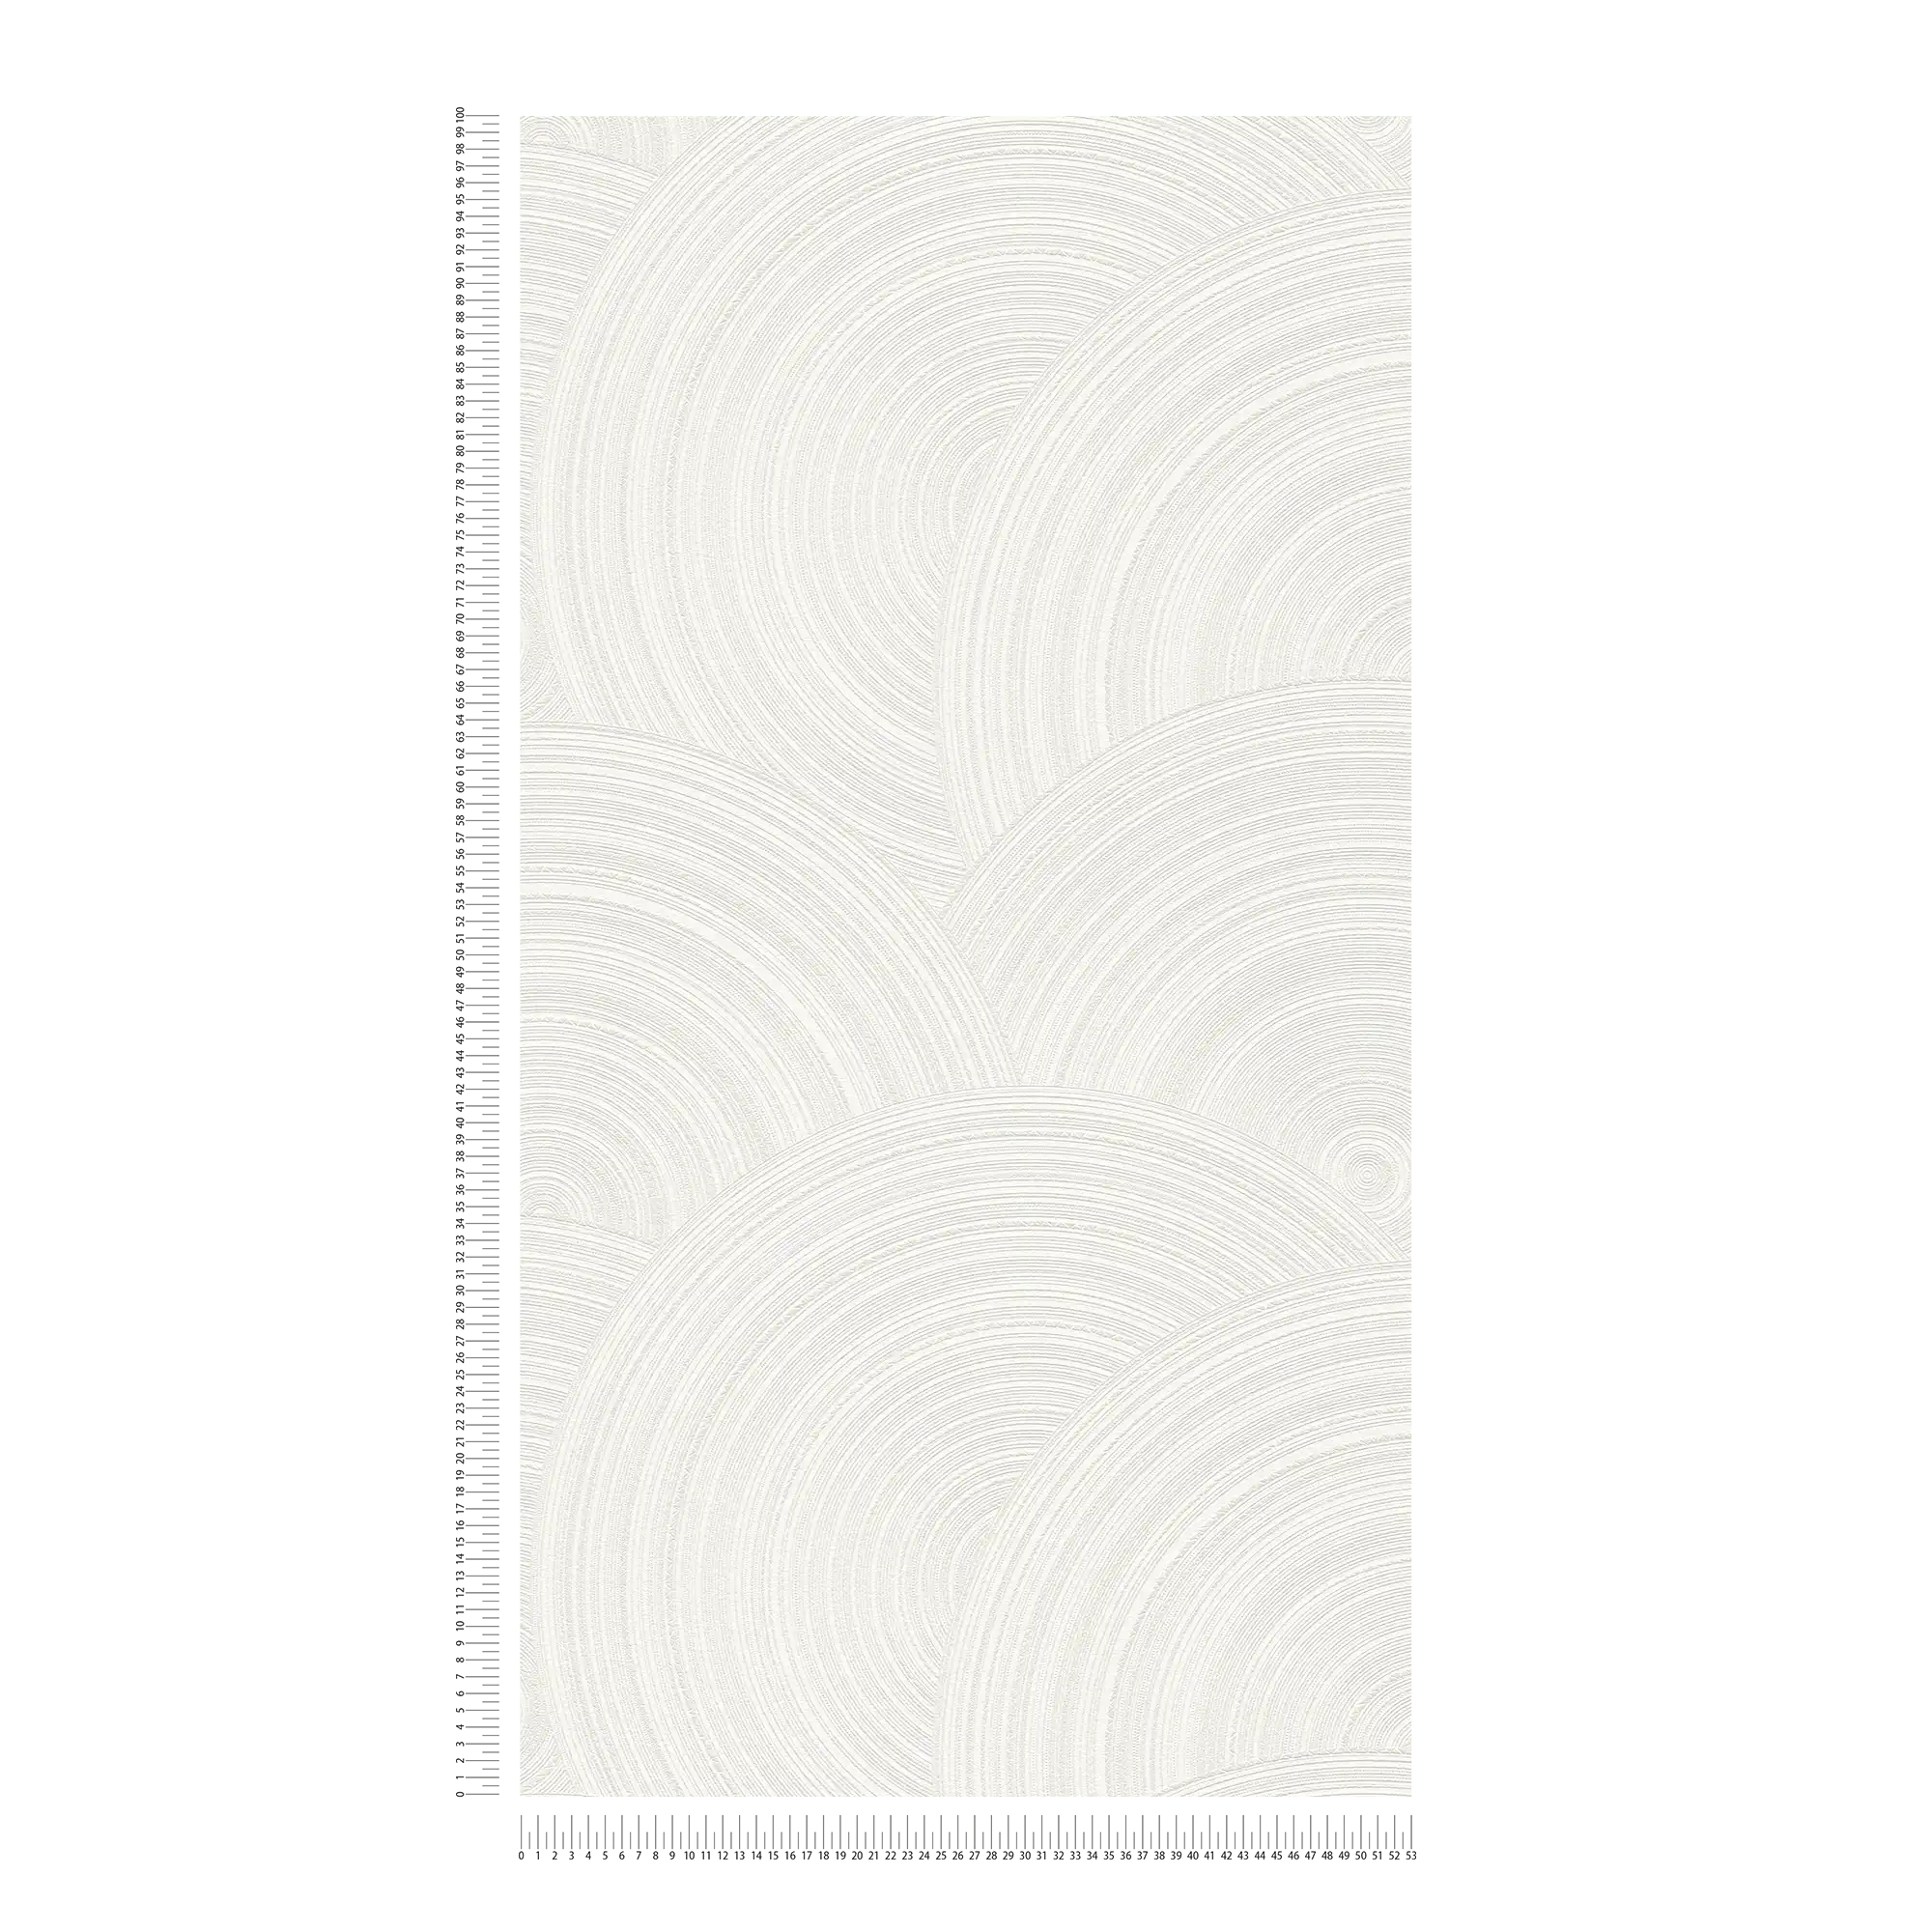             Non-woven wallpaper circle pattern with textured surface - white
        